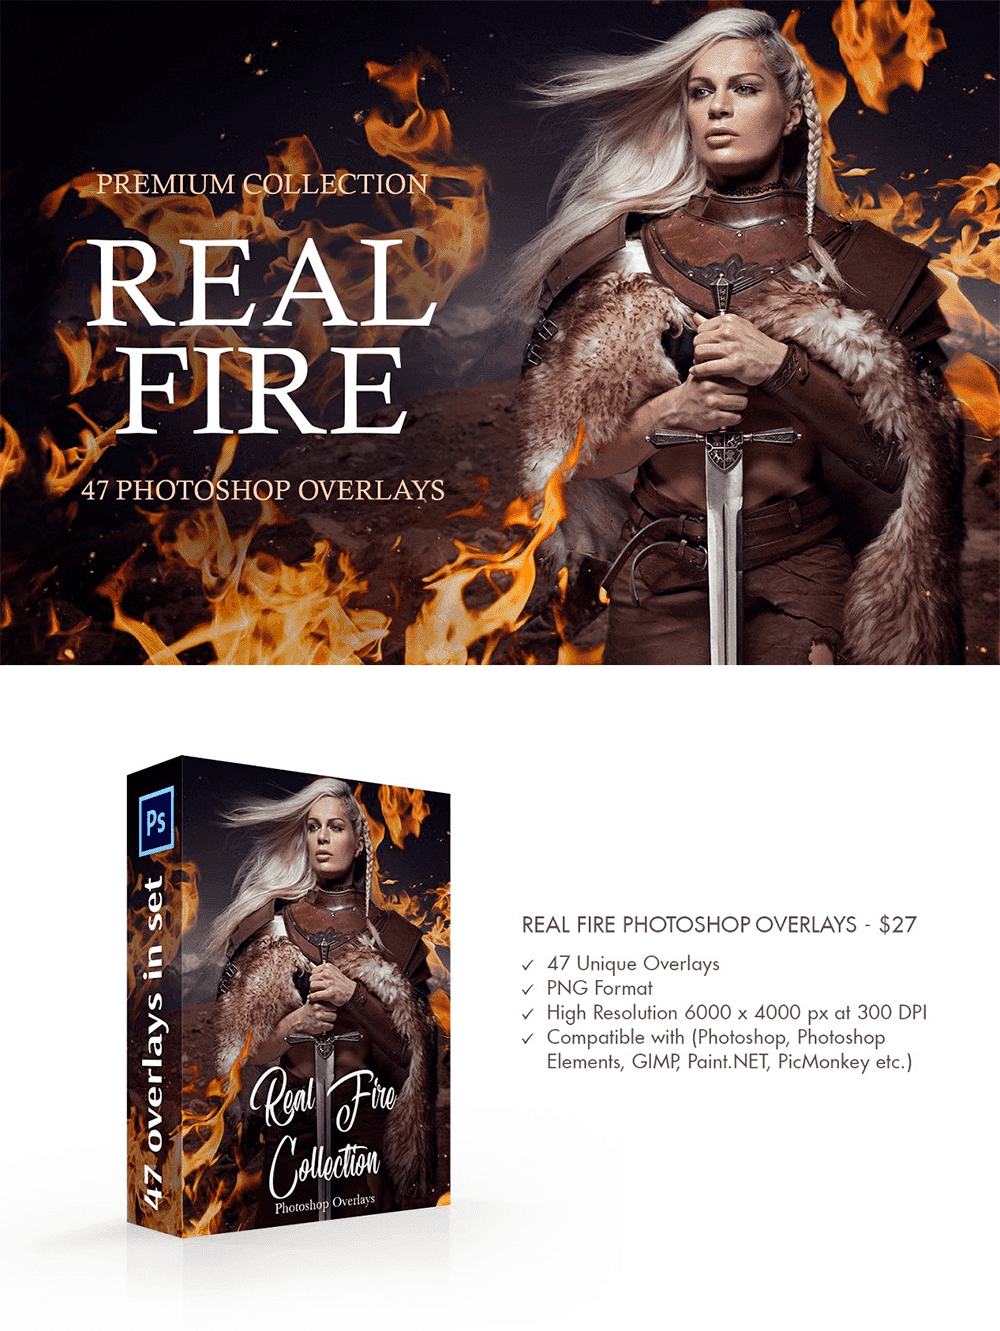 Real fire photoshop overlays, picture for pinterest 1000x1331.